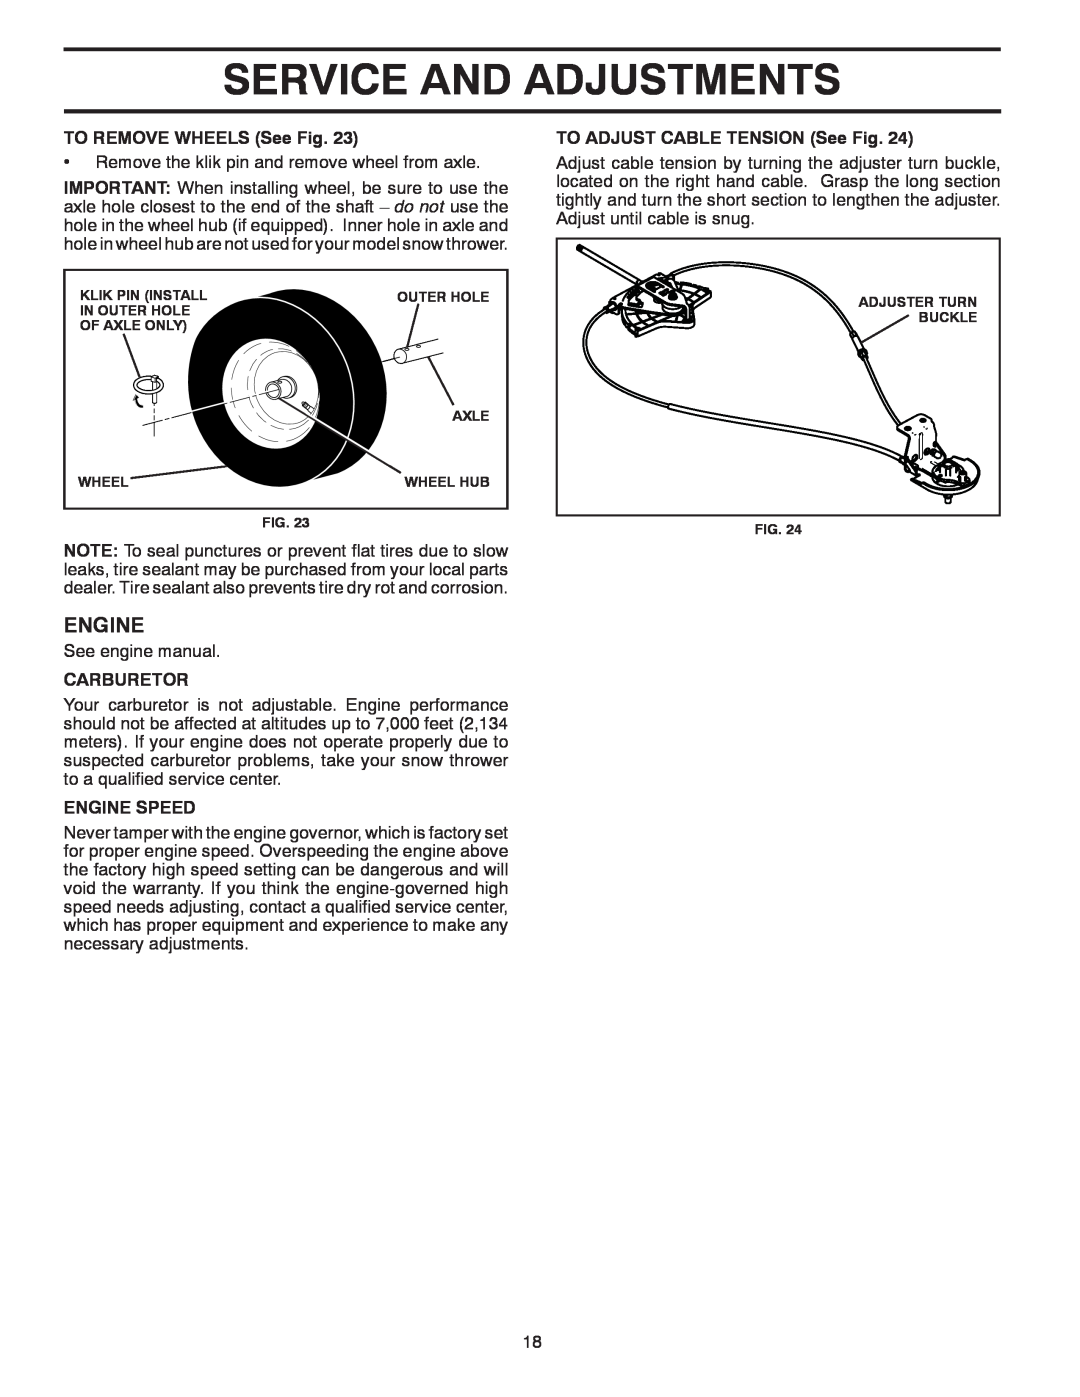 Poulan 429924, 96192003101 owner manual Service And Adjustments, TO REMOVE WHEELS See Fig, Carburetor, Engine Speed 